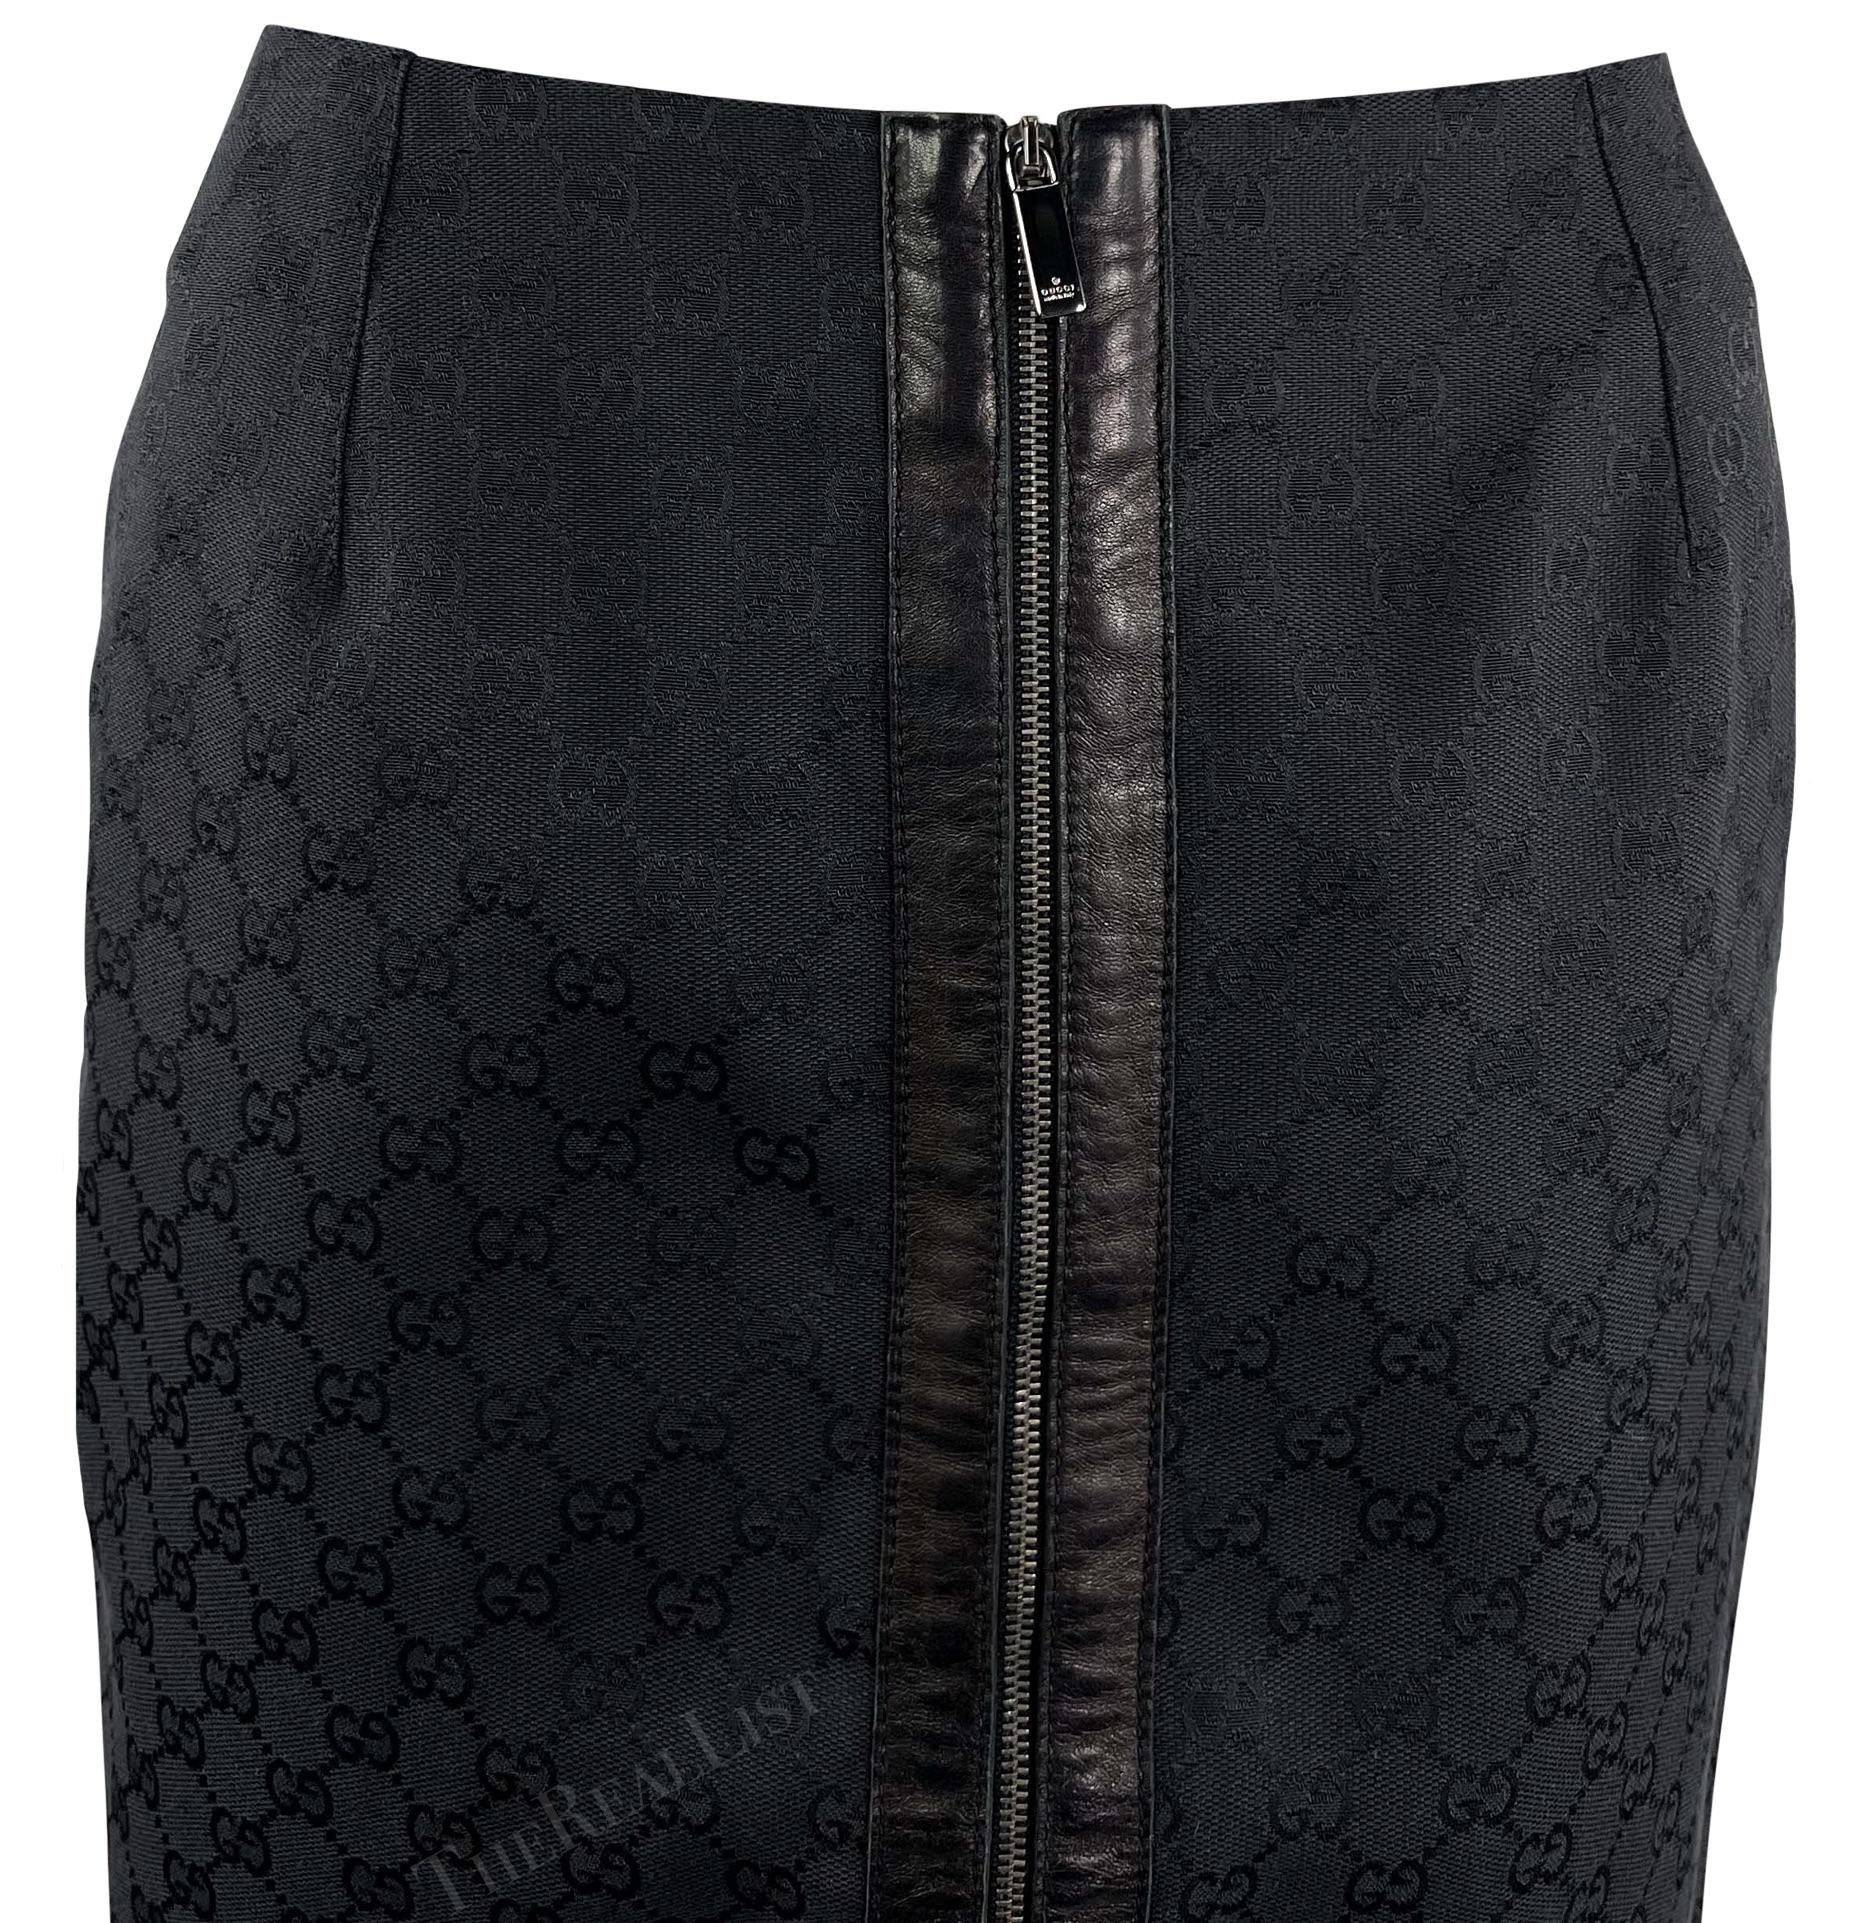 F/W 2000 Gucci by Tom Ford Black GG Monogram Zipper Pencil Skirt For Sale 3